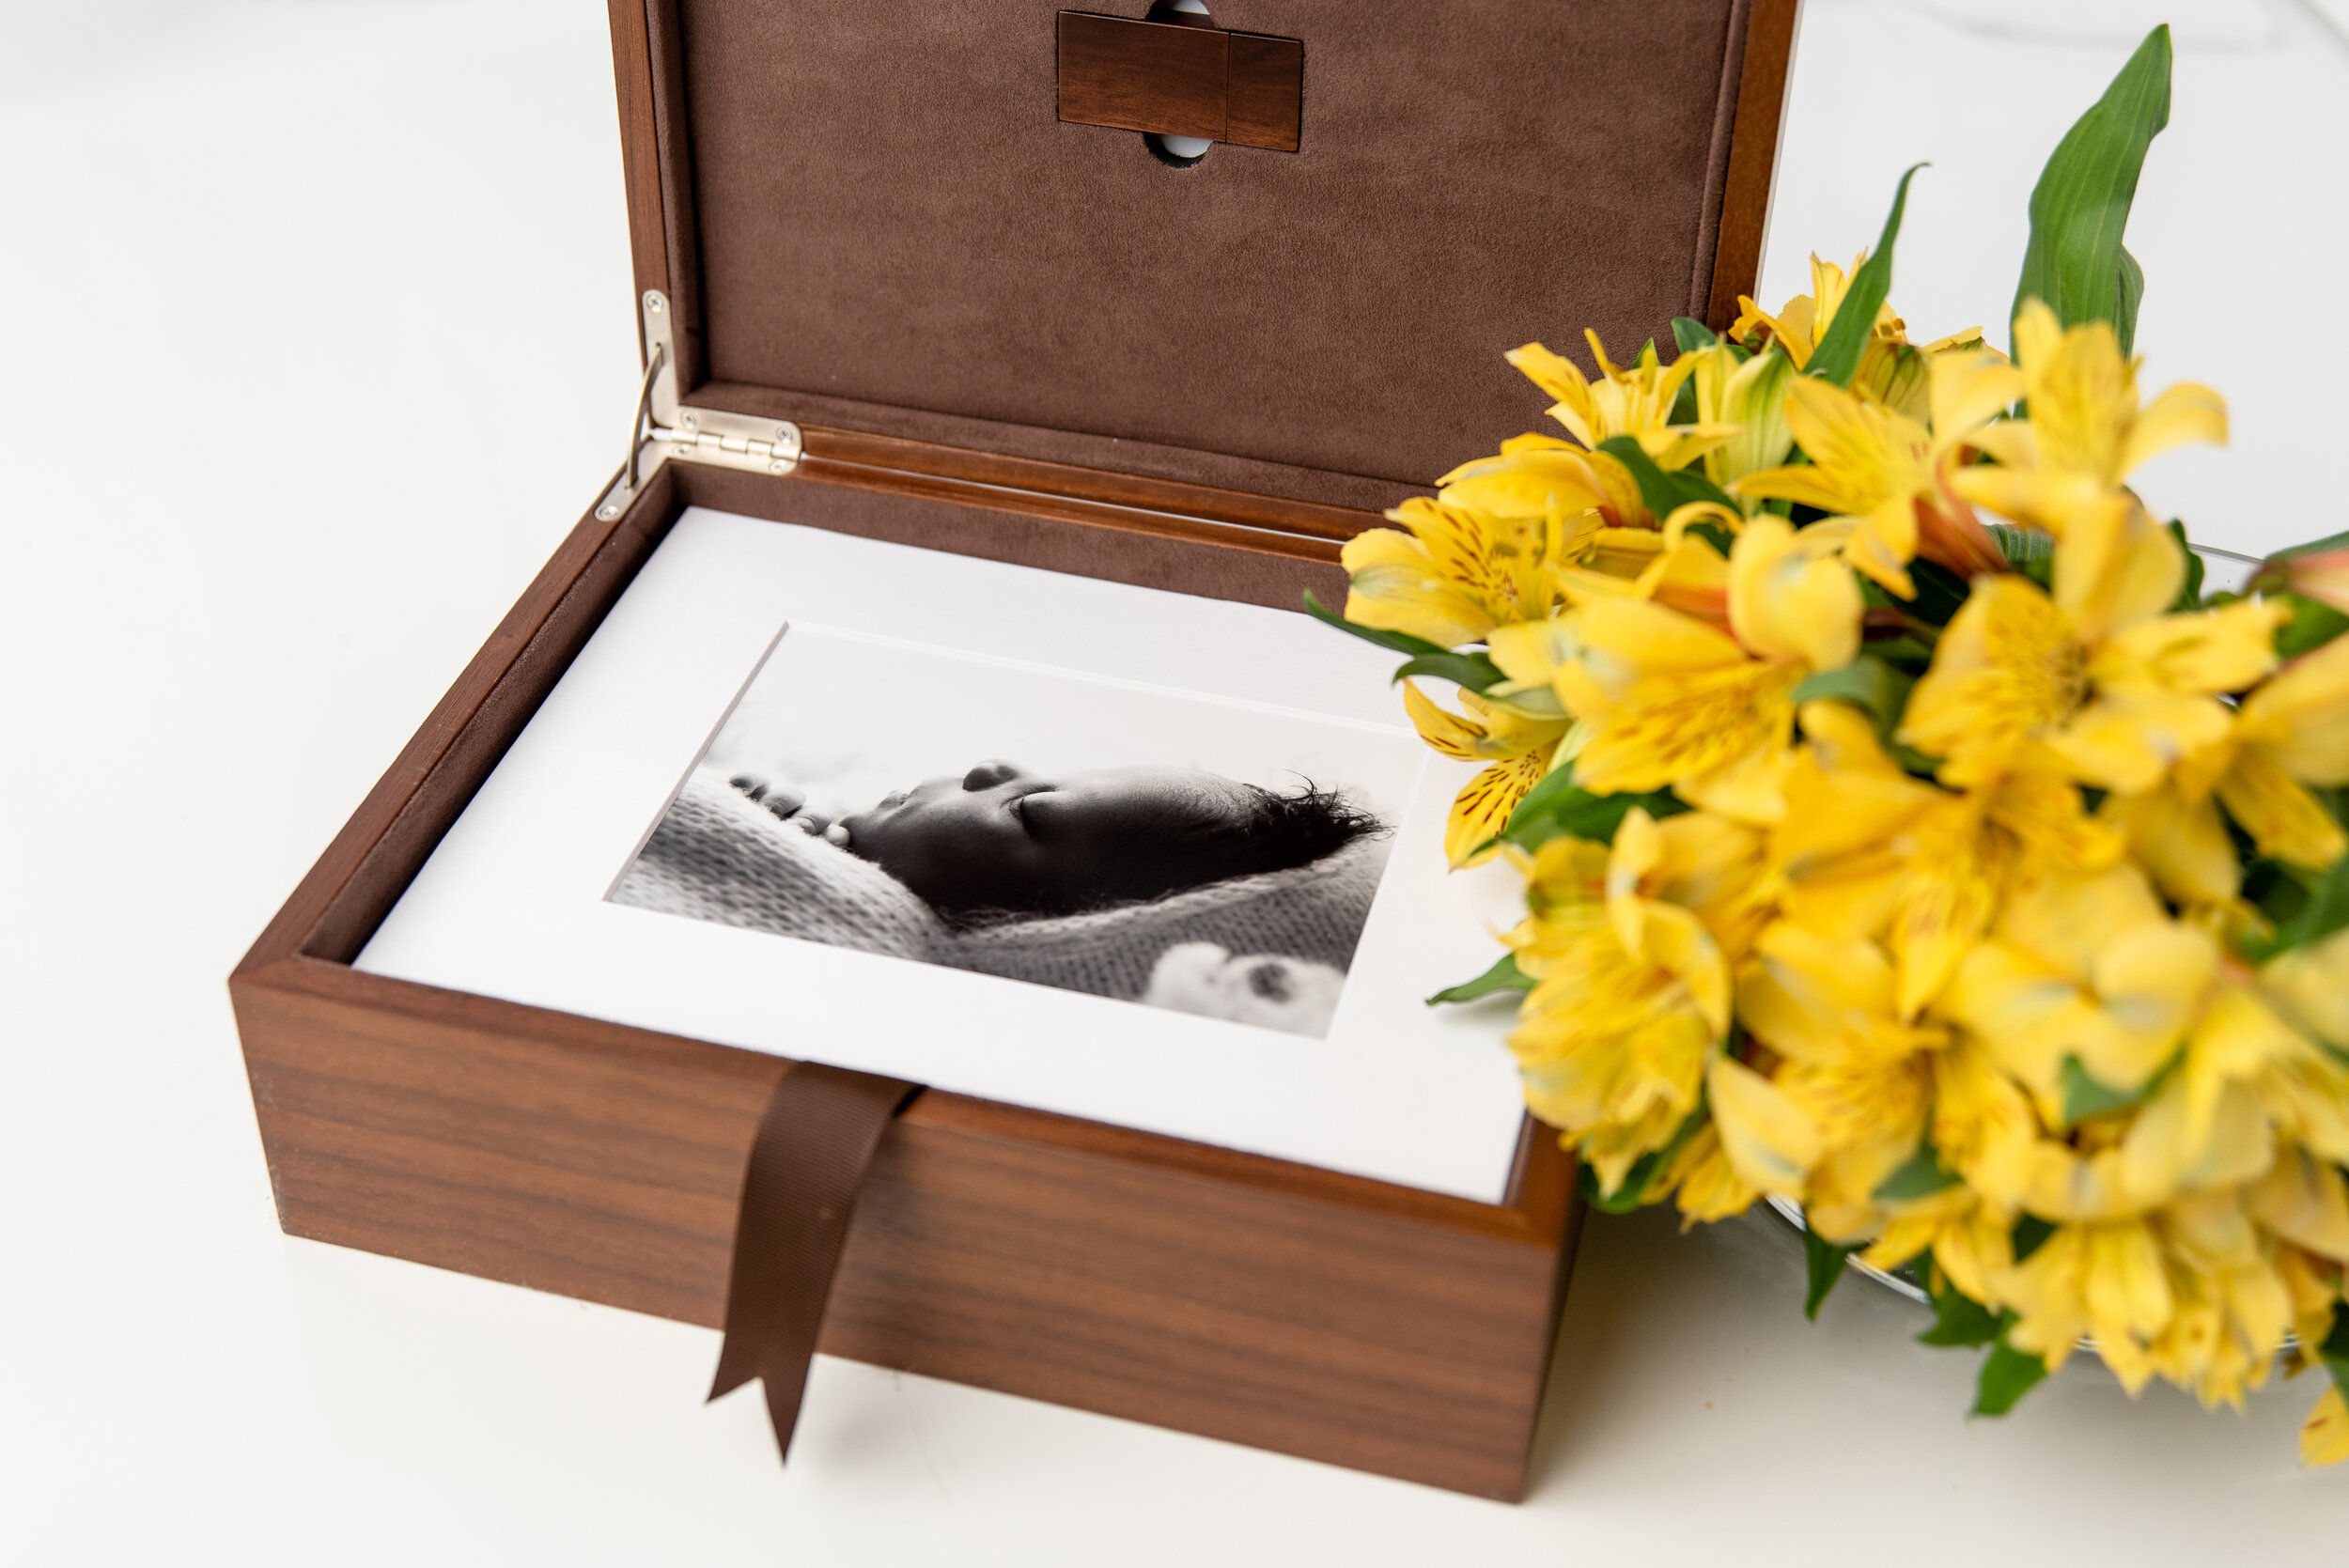 st-louis-maternity-newborn-photographer-open-wood-folio-box-with-baby-boy-and-yellow-floral-accent.jpg